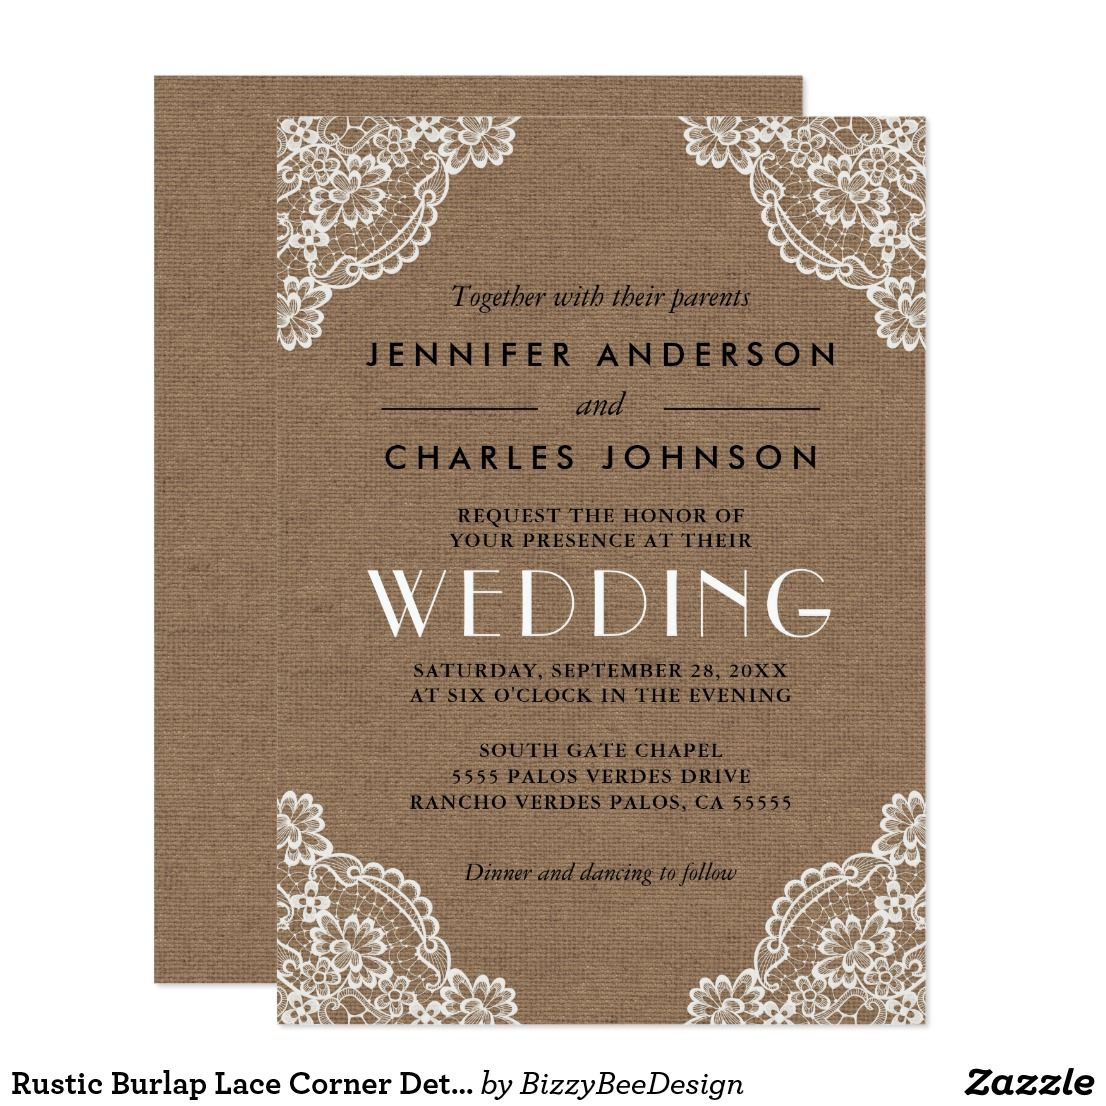 Country Themed Wedding Invitations Rustic Burlap Lace Corner Detail Wedding Invitation In 2018